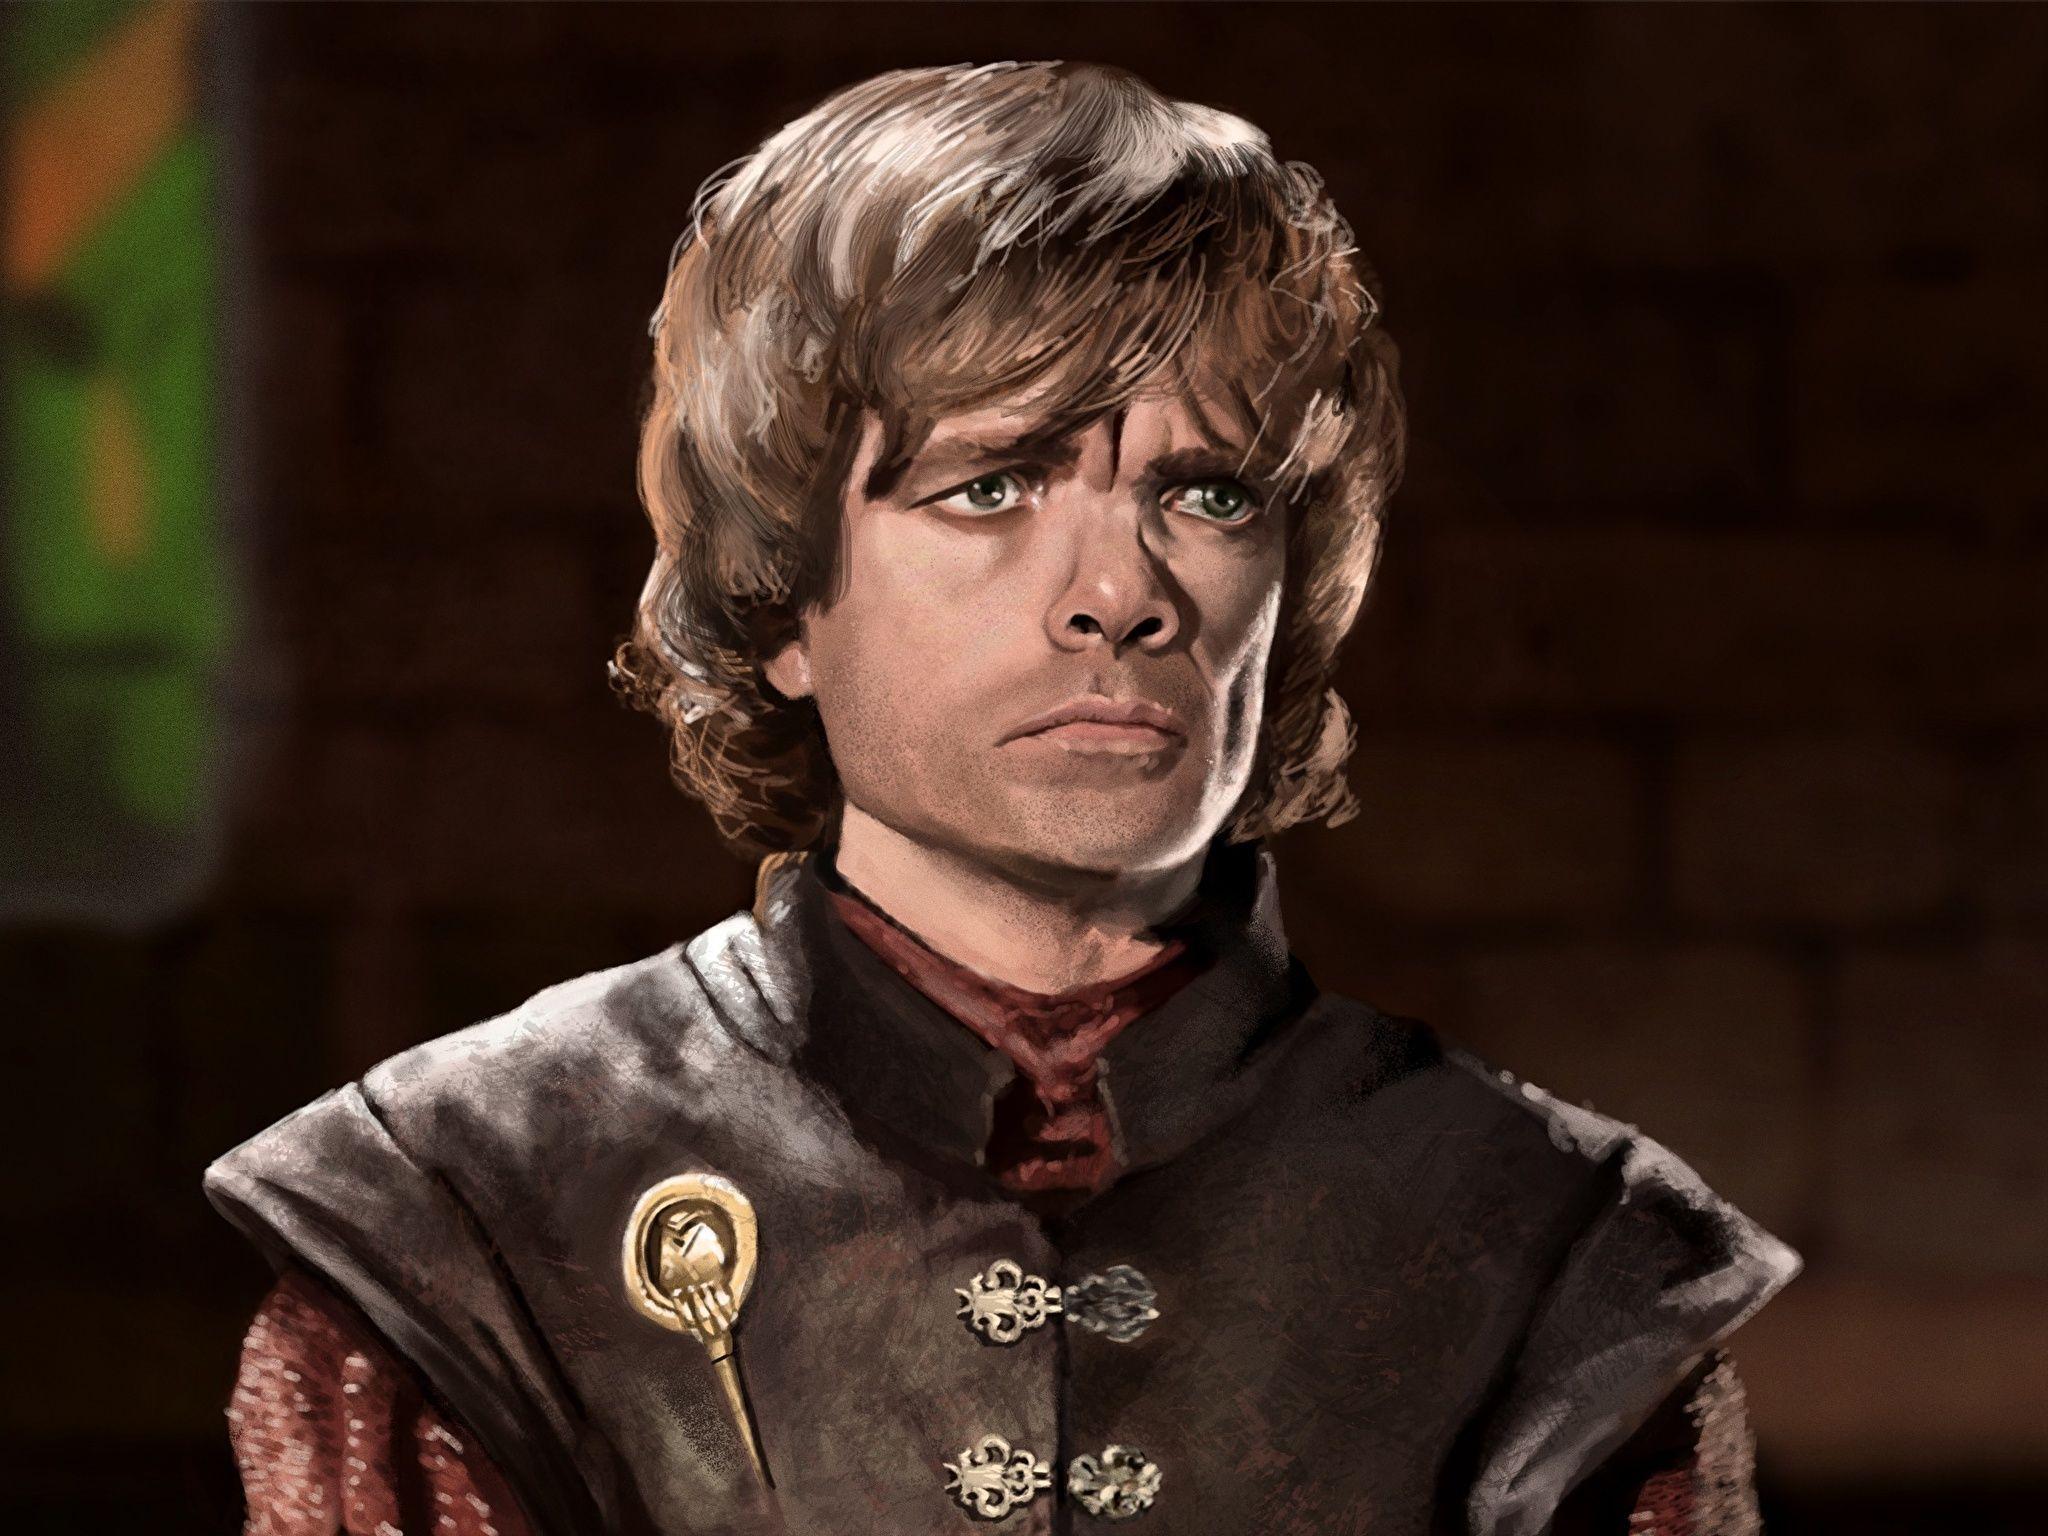 Photo Game of Thrones Peter Dinklage Men Tyrion Lannister 2048x1536